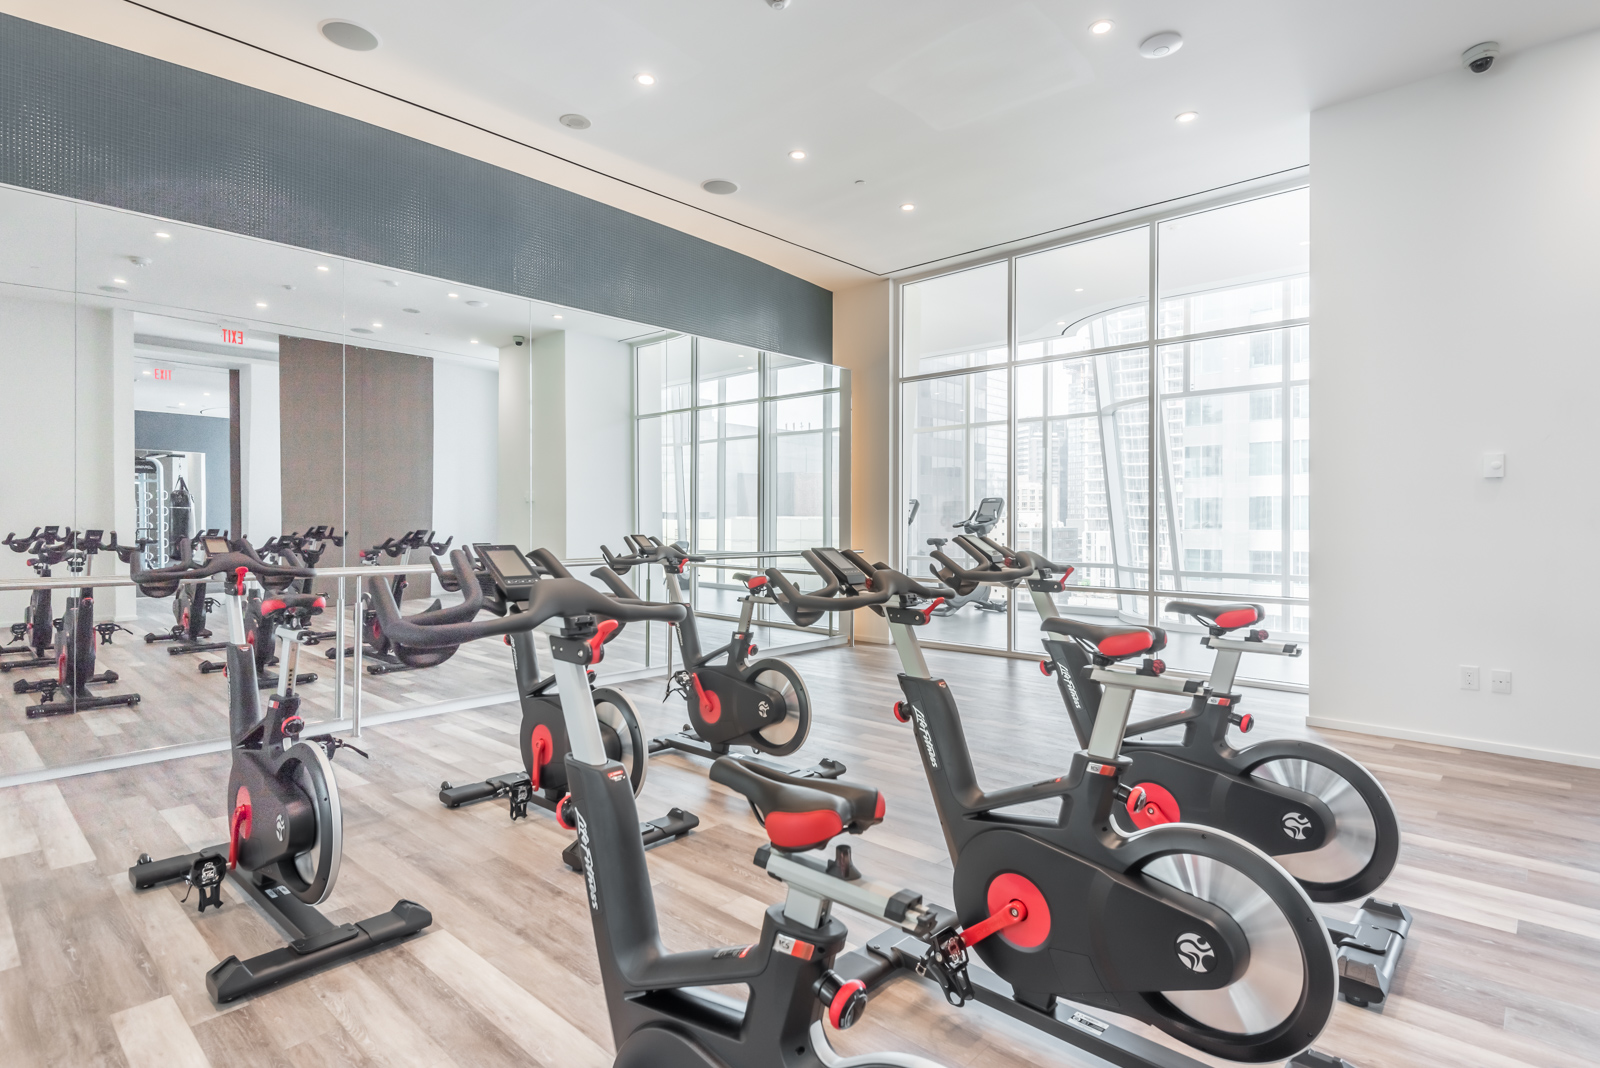 Spin studio and cycles at One Bloor Condos in Toronto.